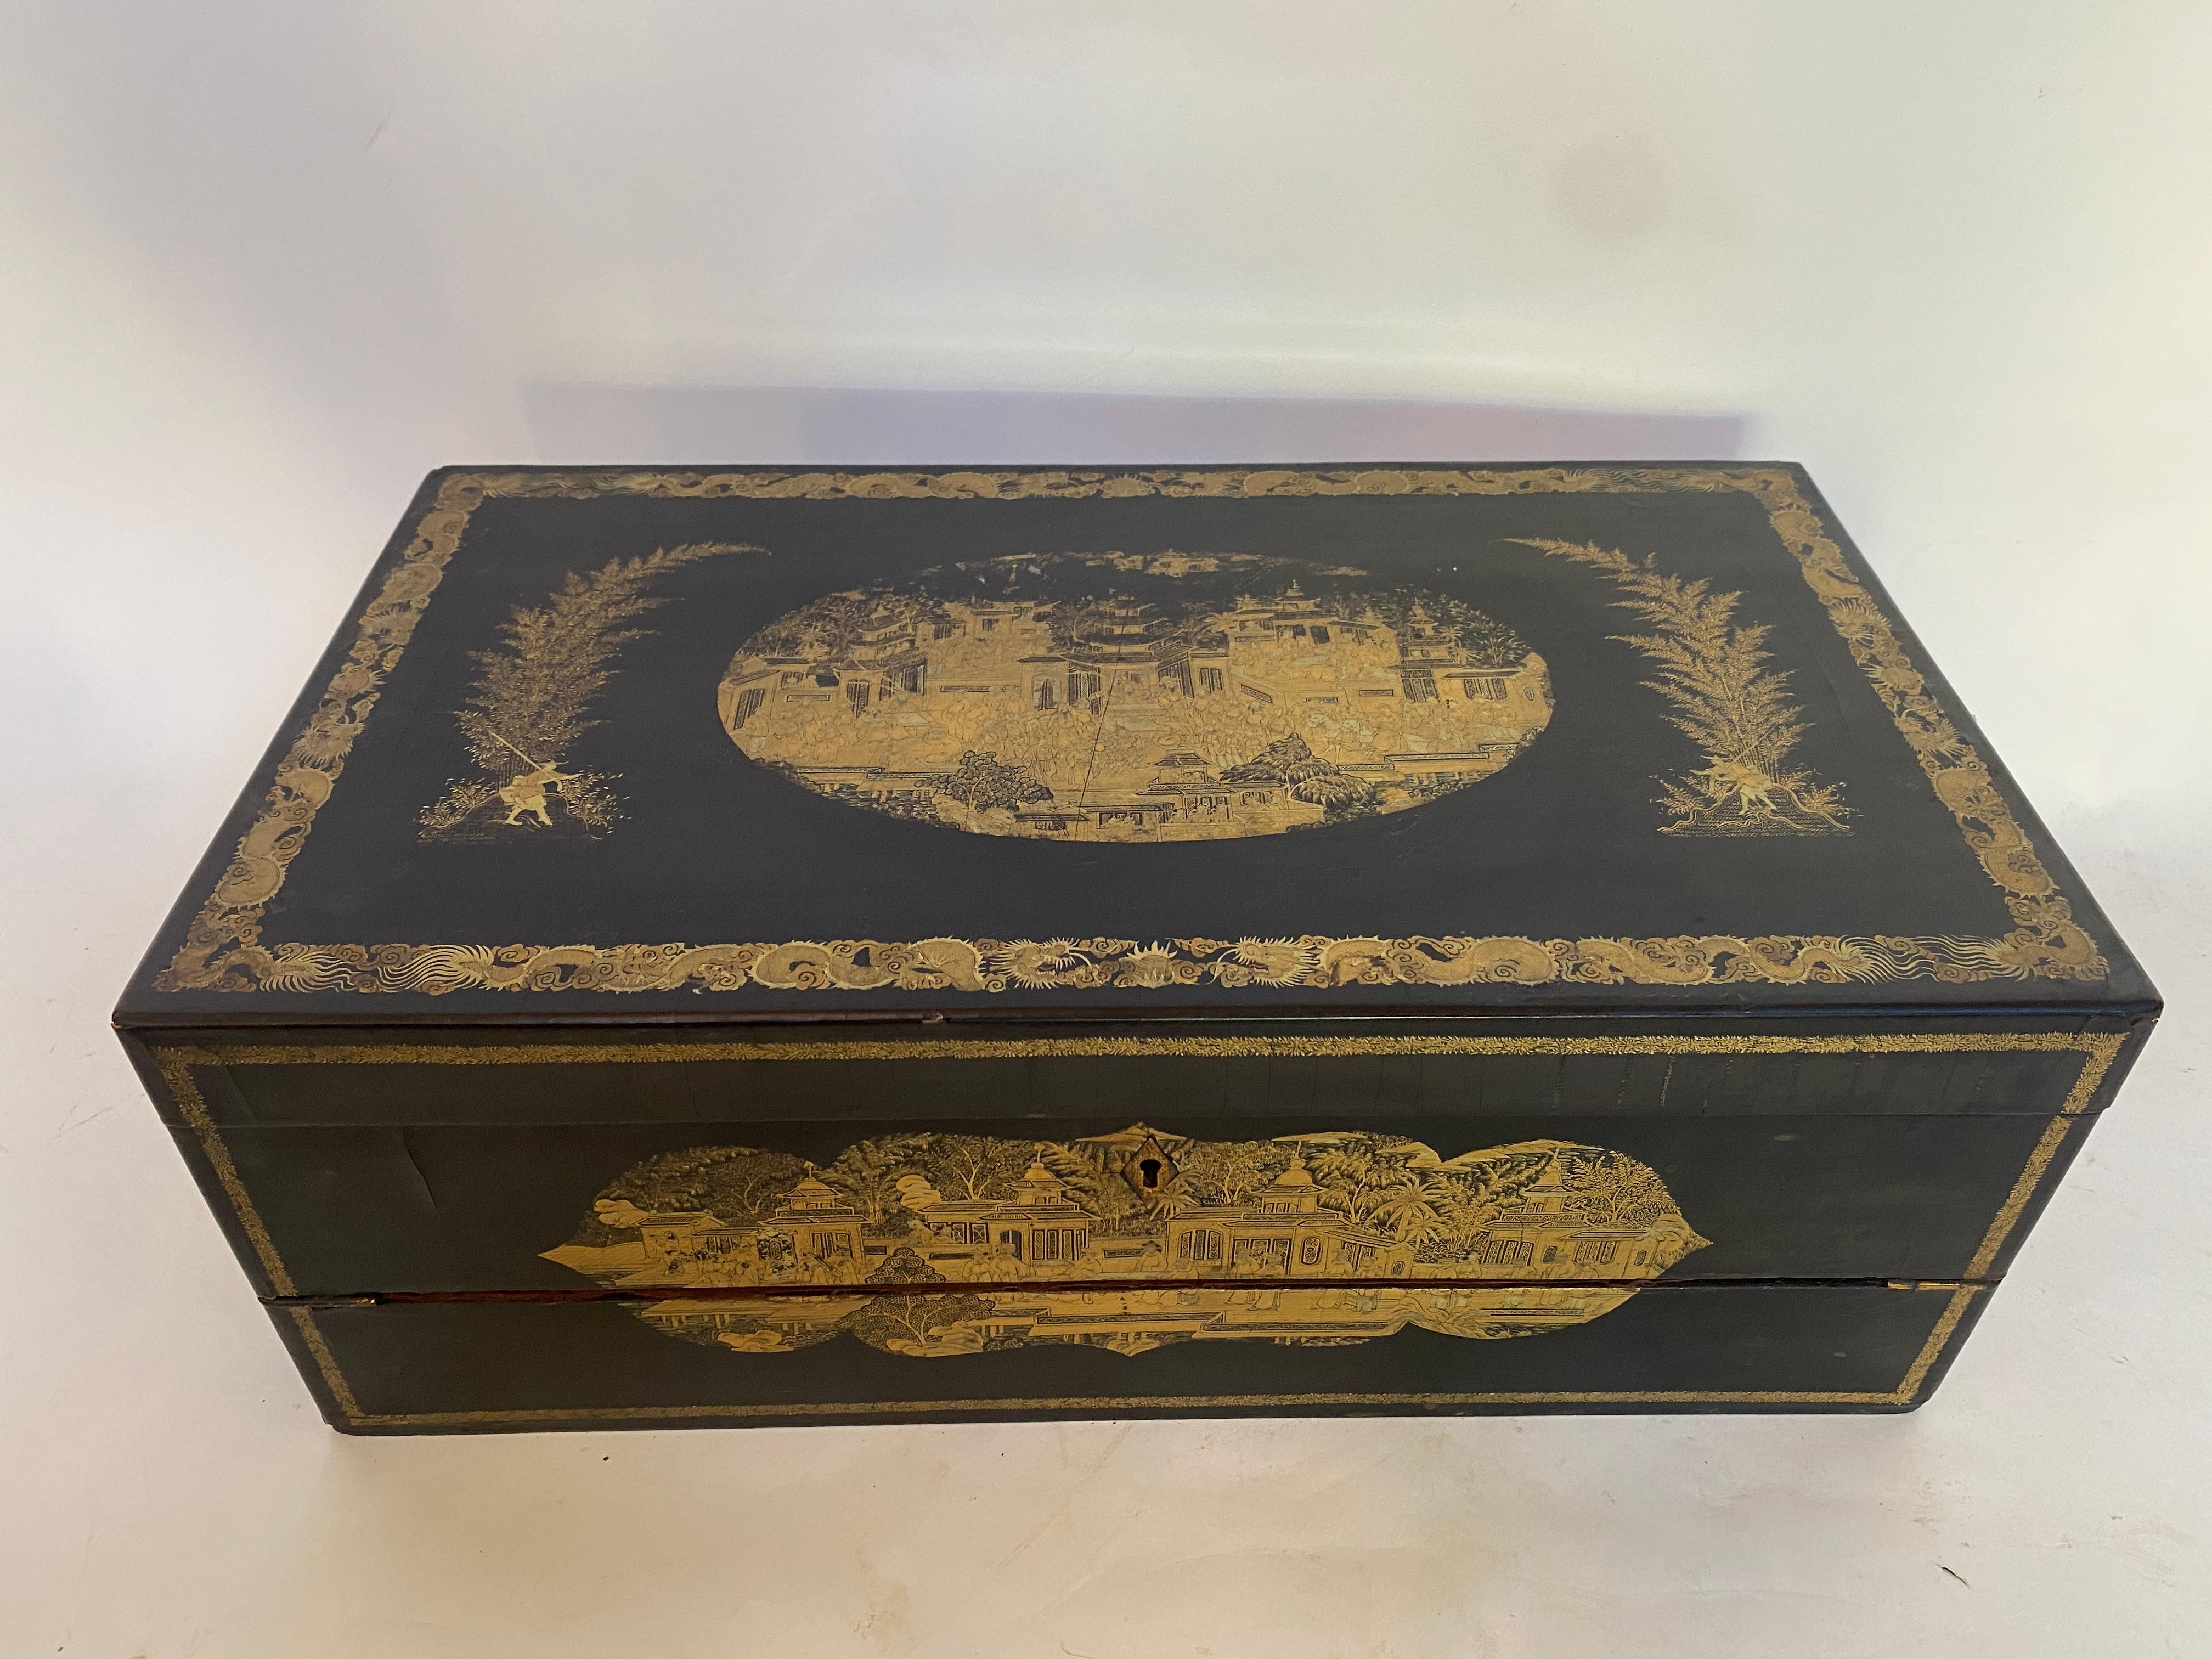 big 19th Century gilt black lacquer Chinese writing table box . very good condition and beautiful hand paint  , See more pictures, measures: 18.25